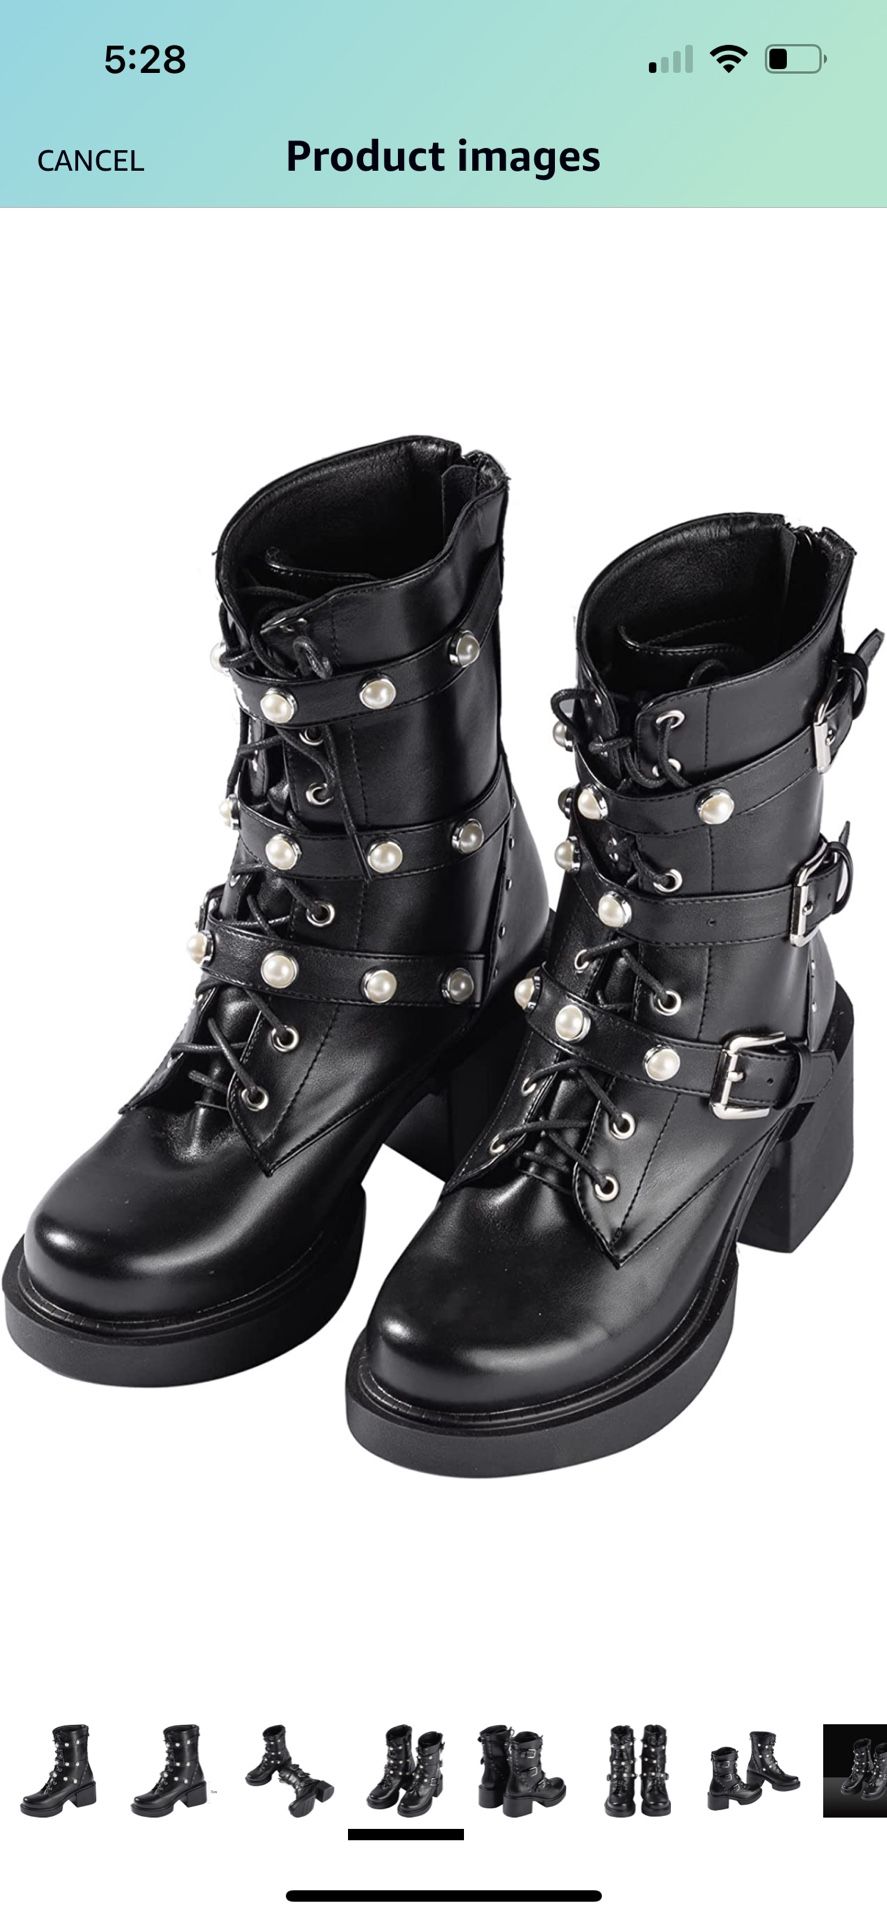 Lace up Military Combat Boots for Women Fashion Chain Studded Pearl Ankle Booties with Zipper Platform Goth Boots